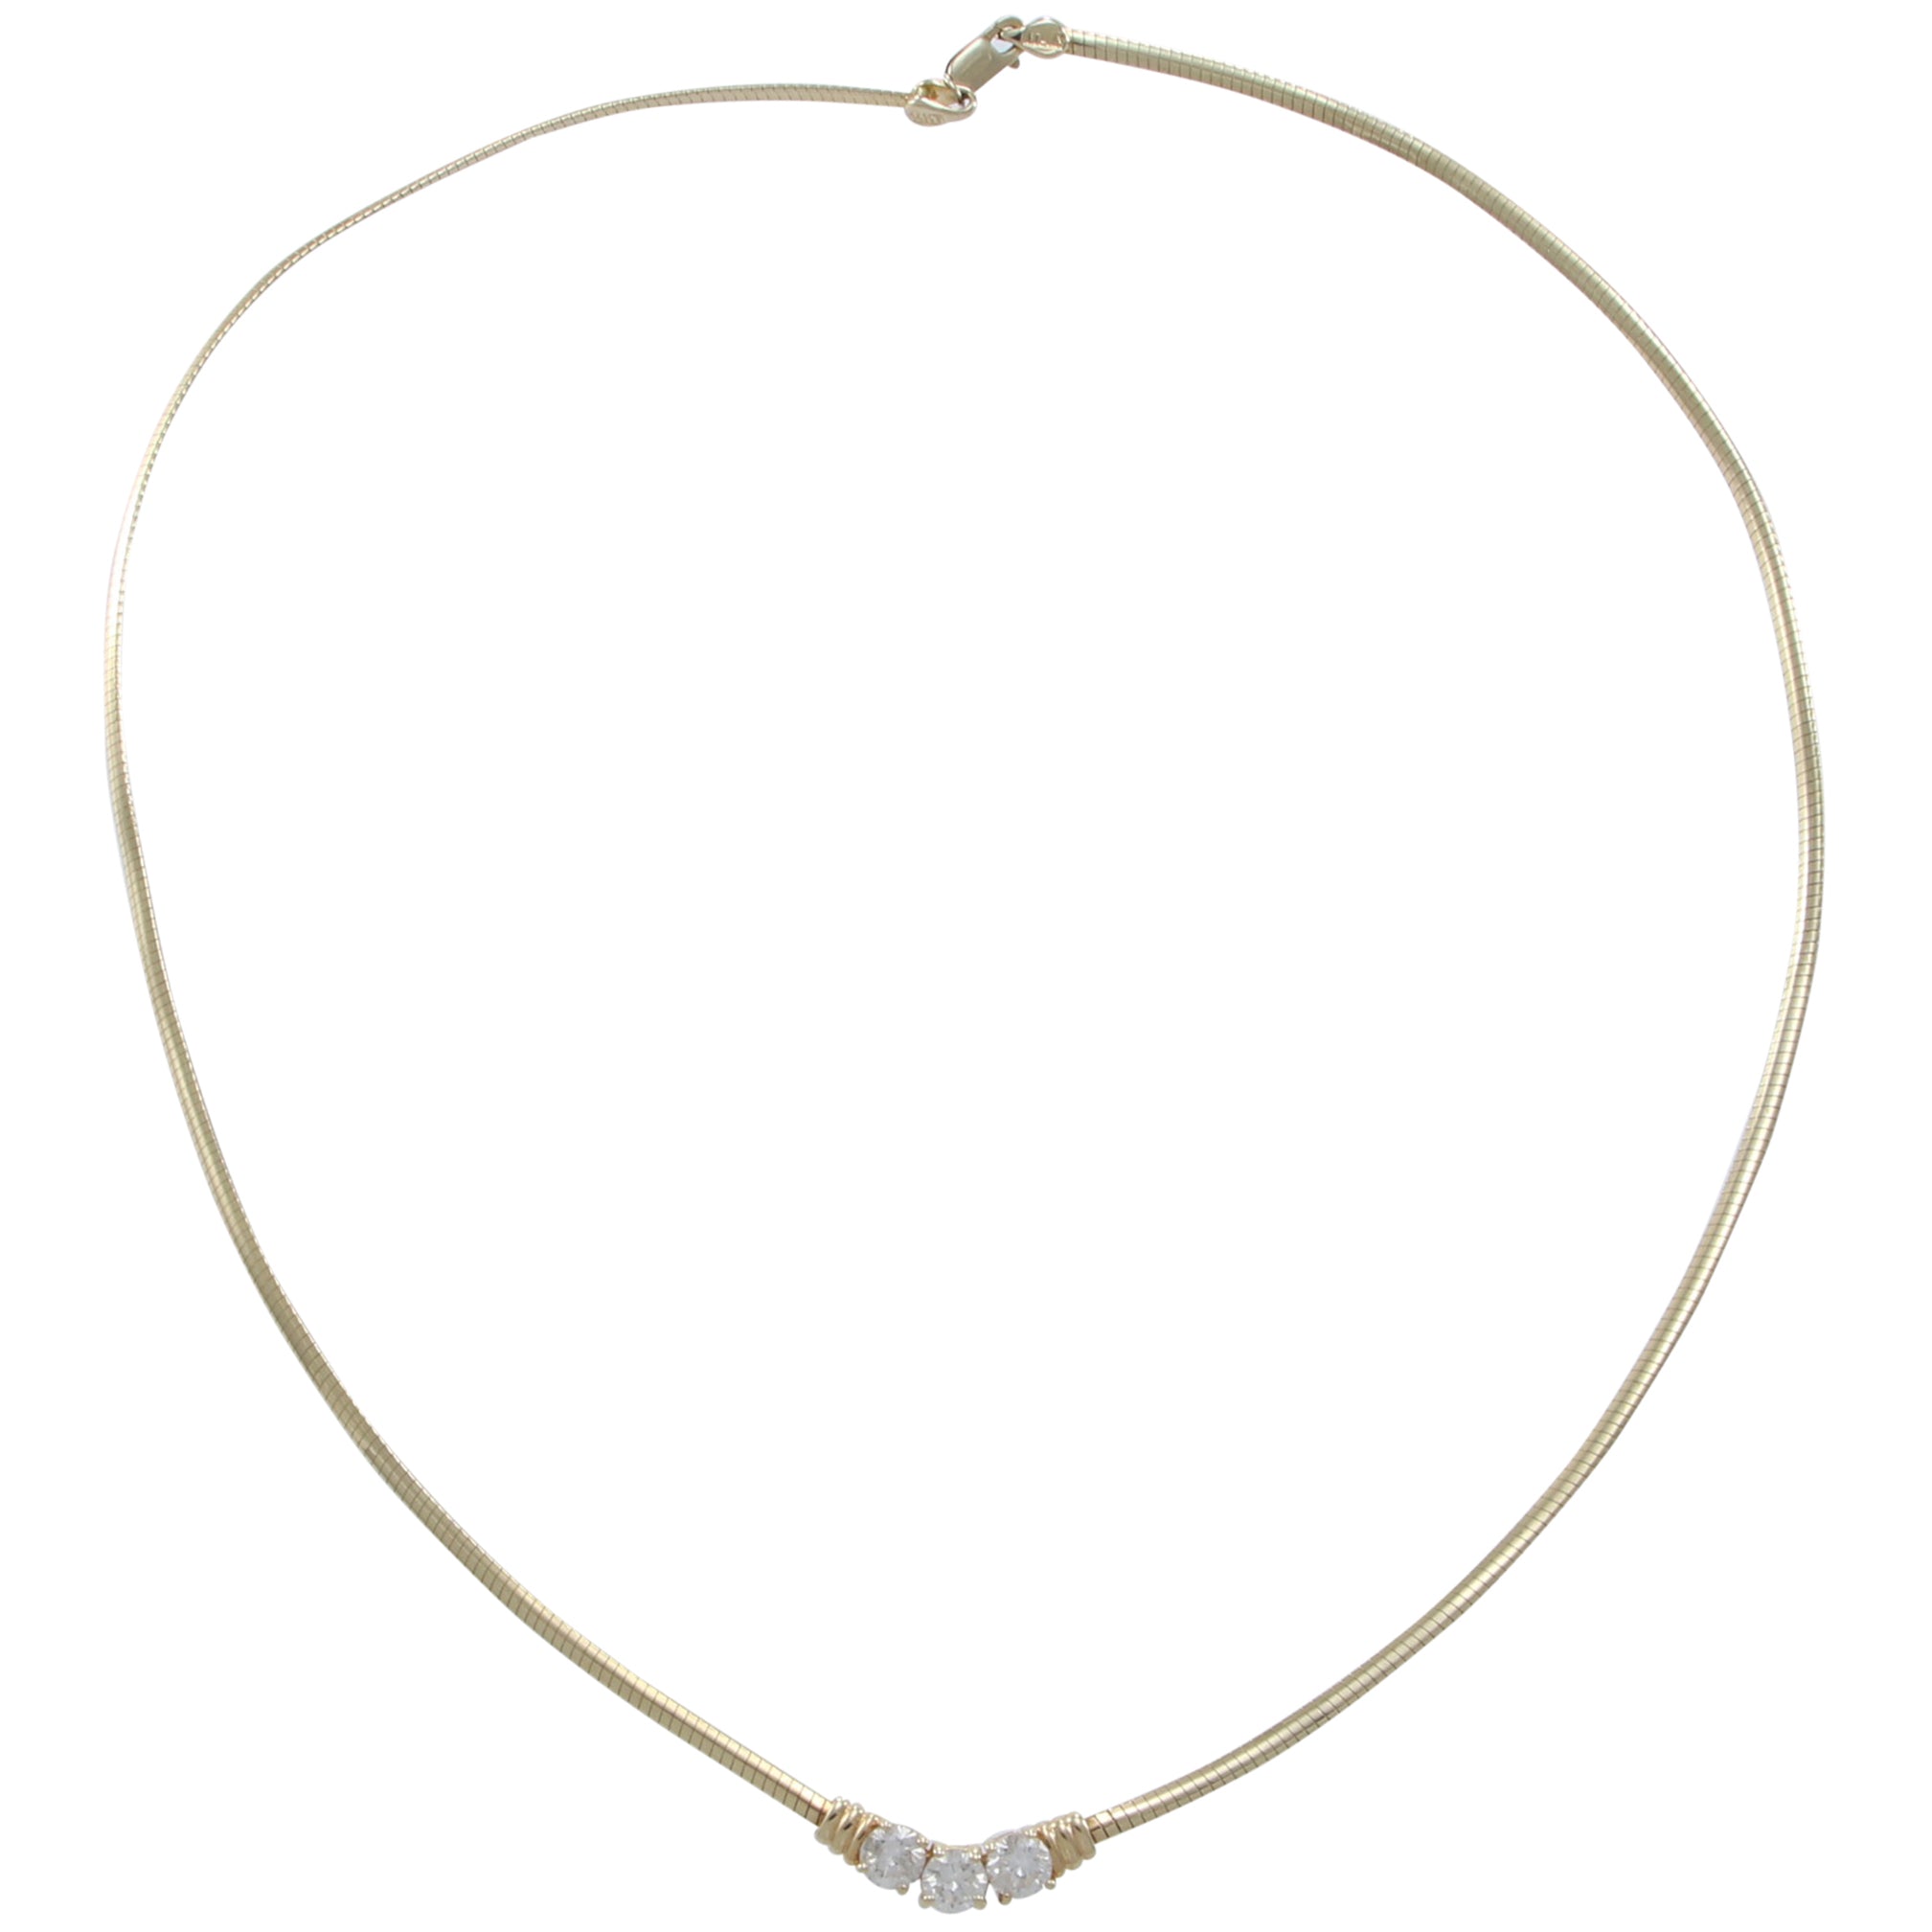 Solid Reversible Omega Chain Necklace 14K Yellow Gold/Sterling Silver 16